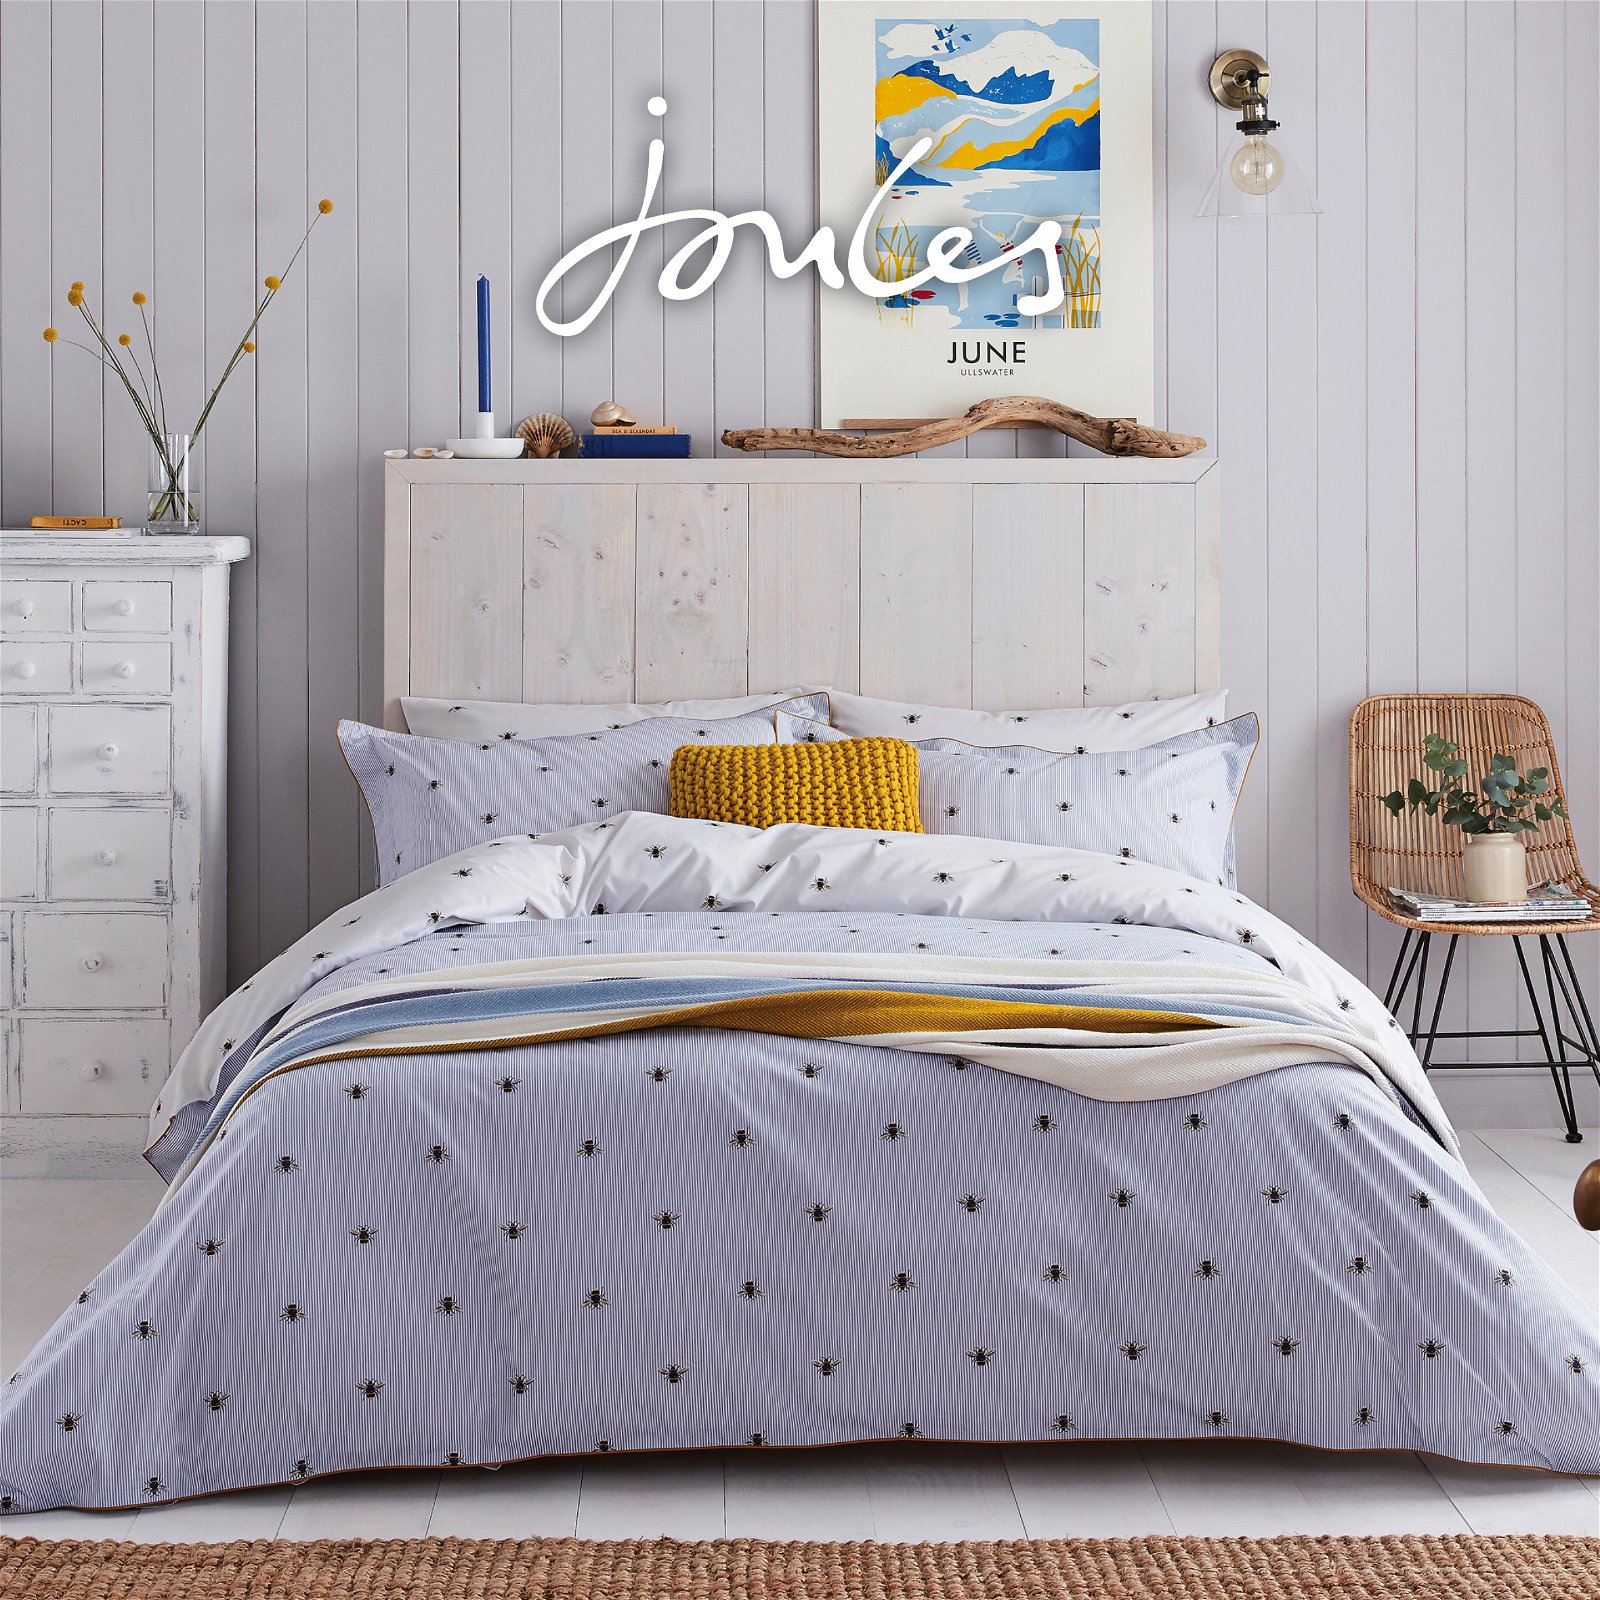 Joules Botanical Bee Bedding in Blue